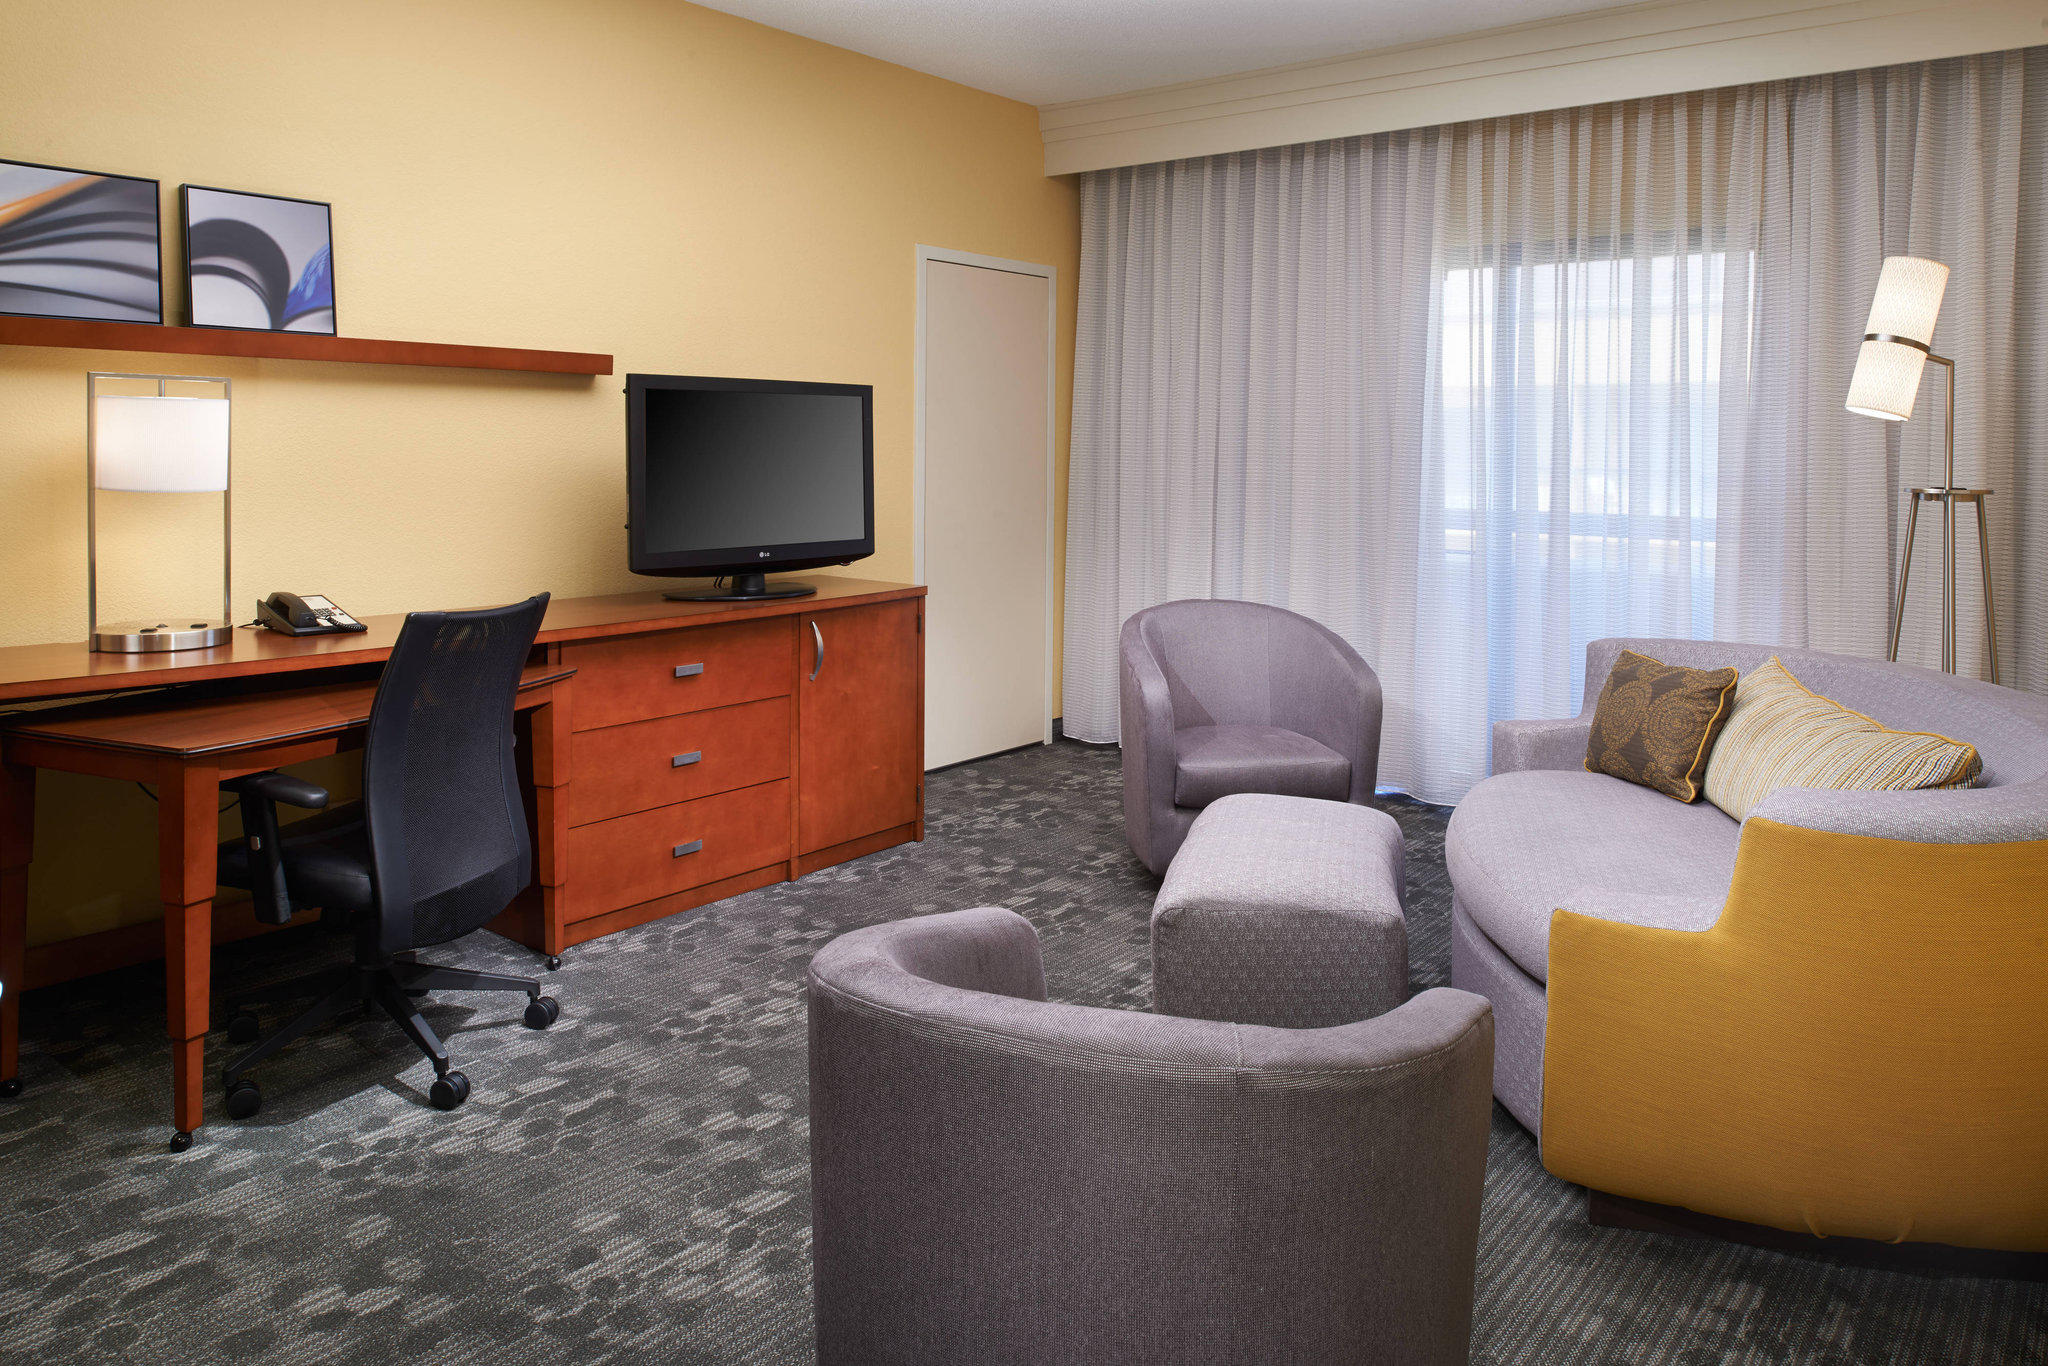 Courtyard by Marriott St. Louis Westport Plaza Coupons near me in St. Louis, MO 63146 | 8coupons